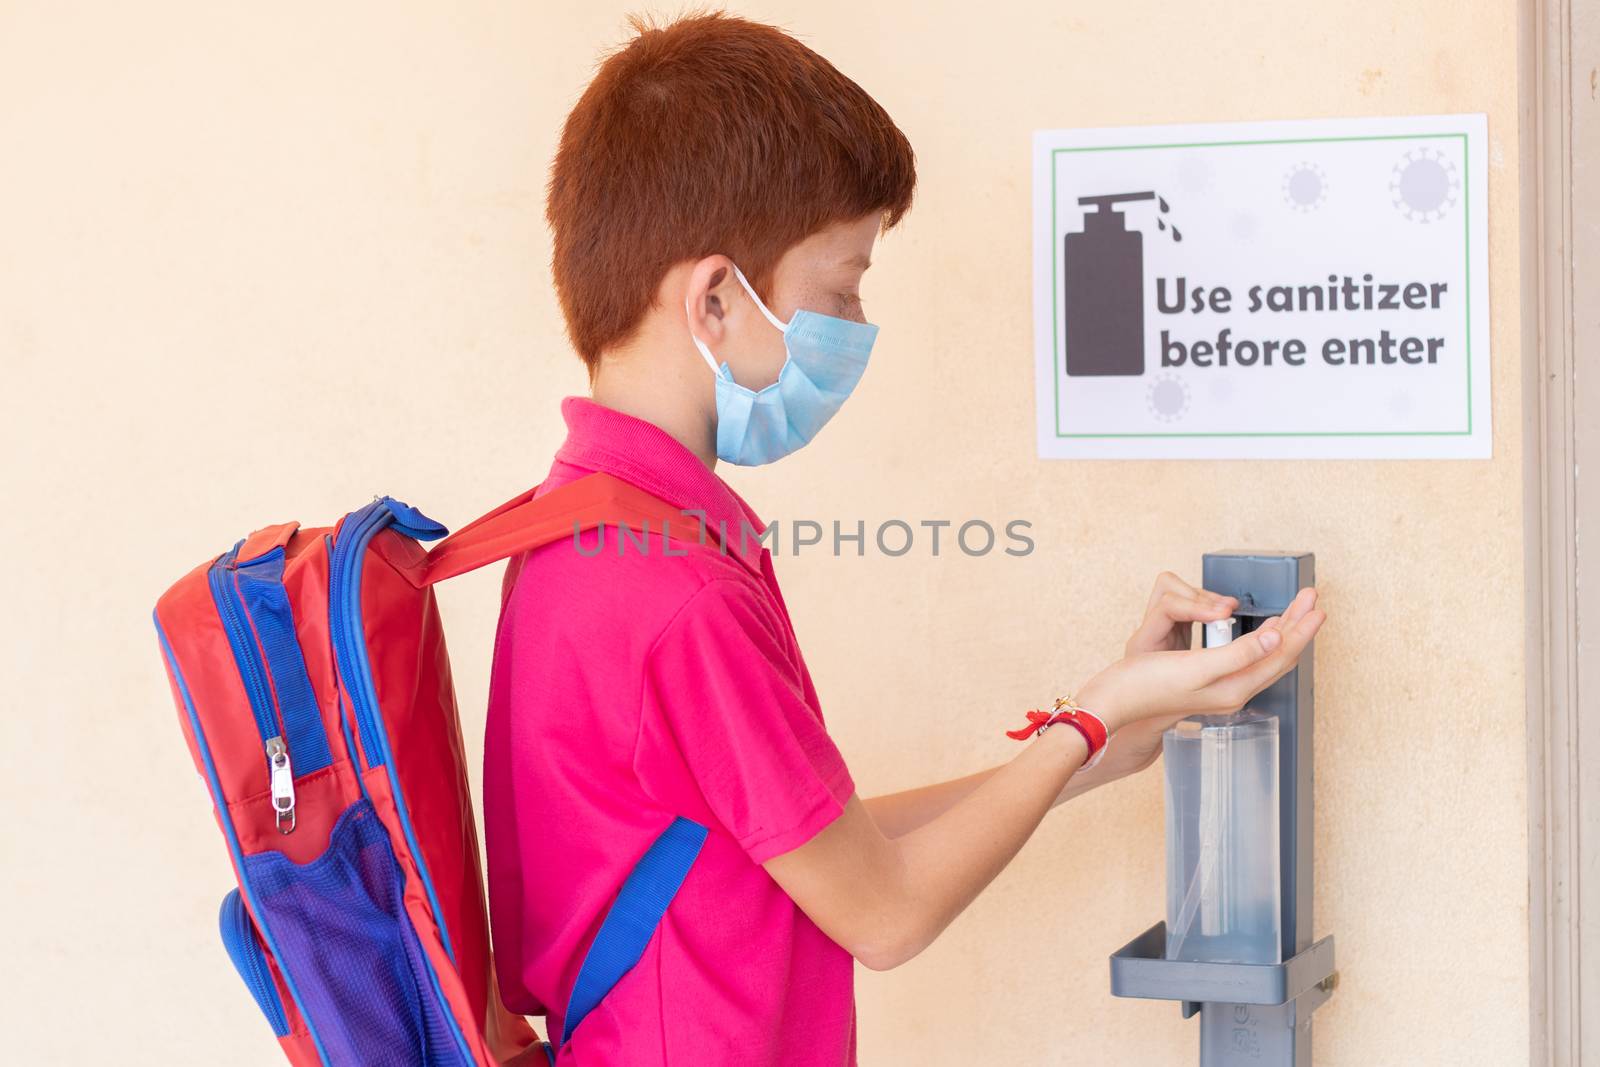 Kid with medical mask using hand sanitizer before entering classroom - concept of back to school or school reopen and coronavirus or covid-19 safety measures. by lakshmiprasad.maski@gmai.com